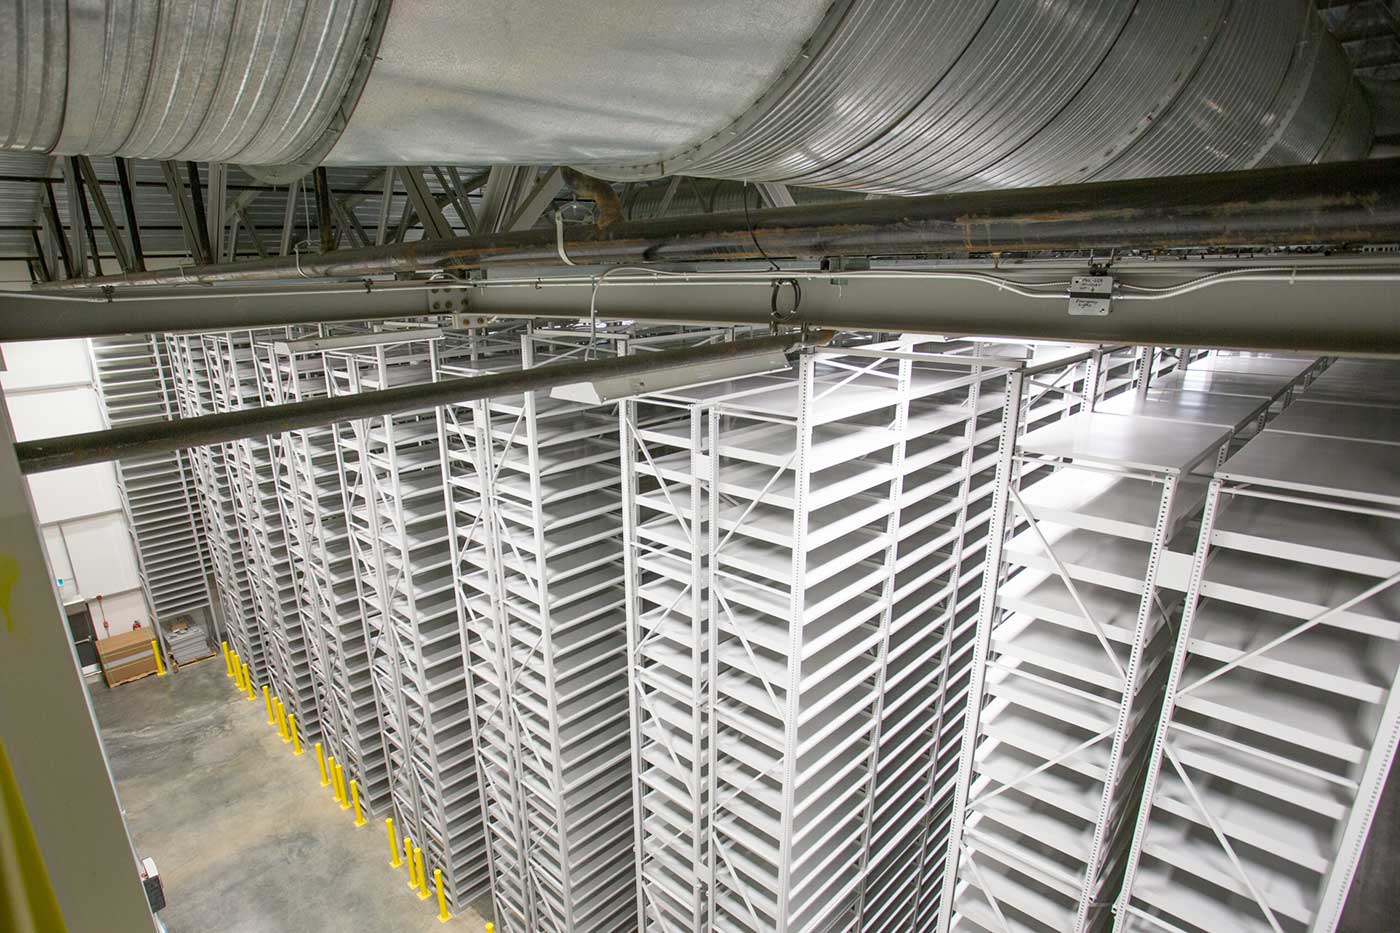 High-bay shelving stacks at the University of Alberta's off-site storage facility